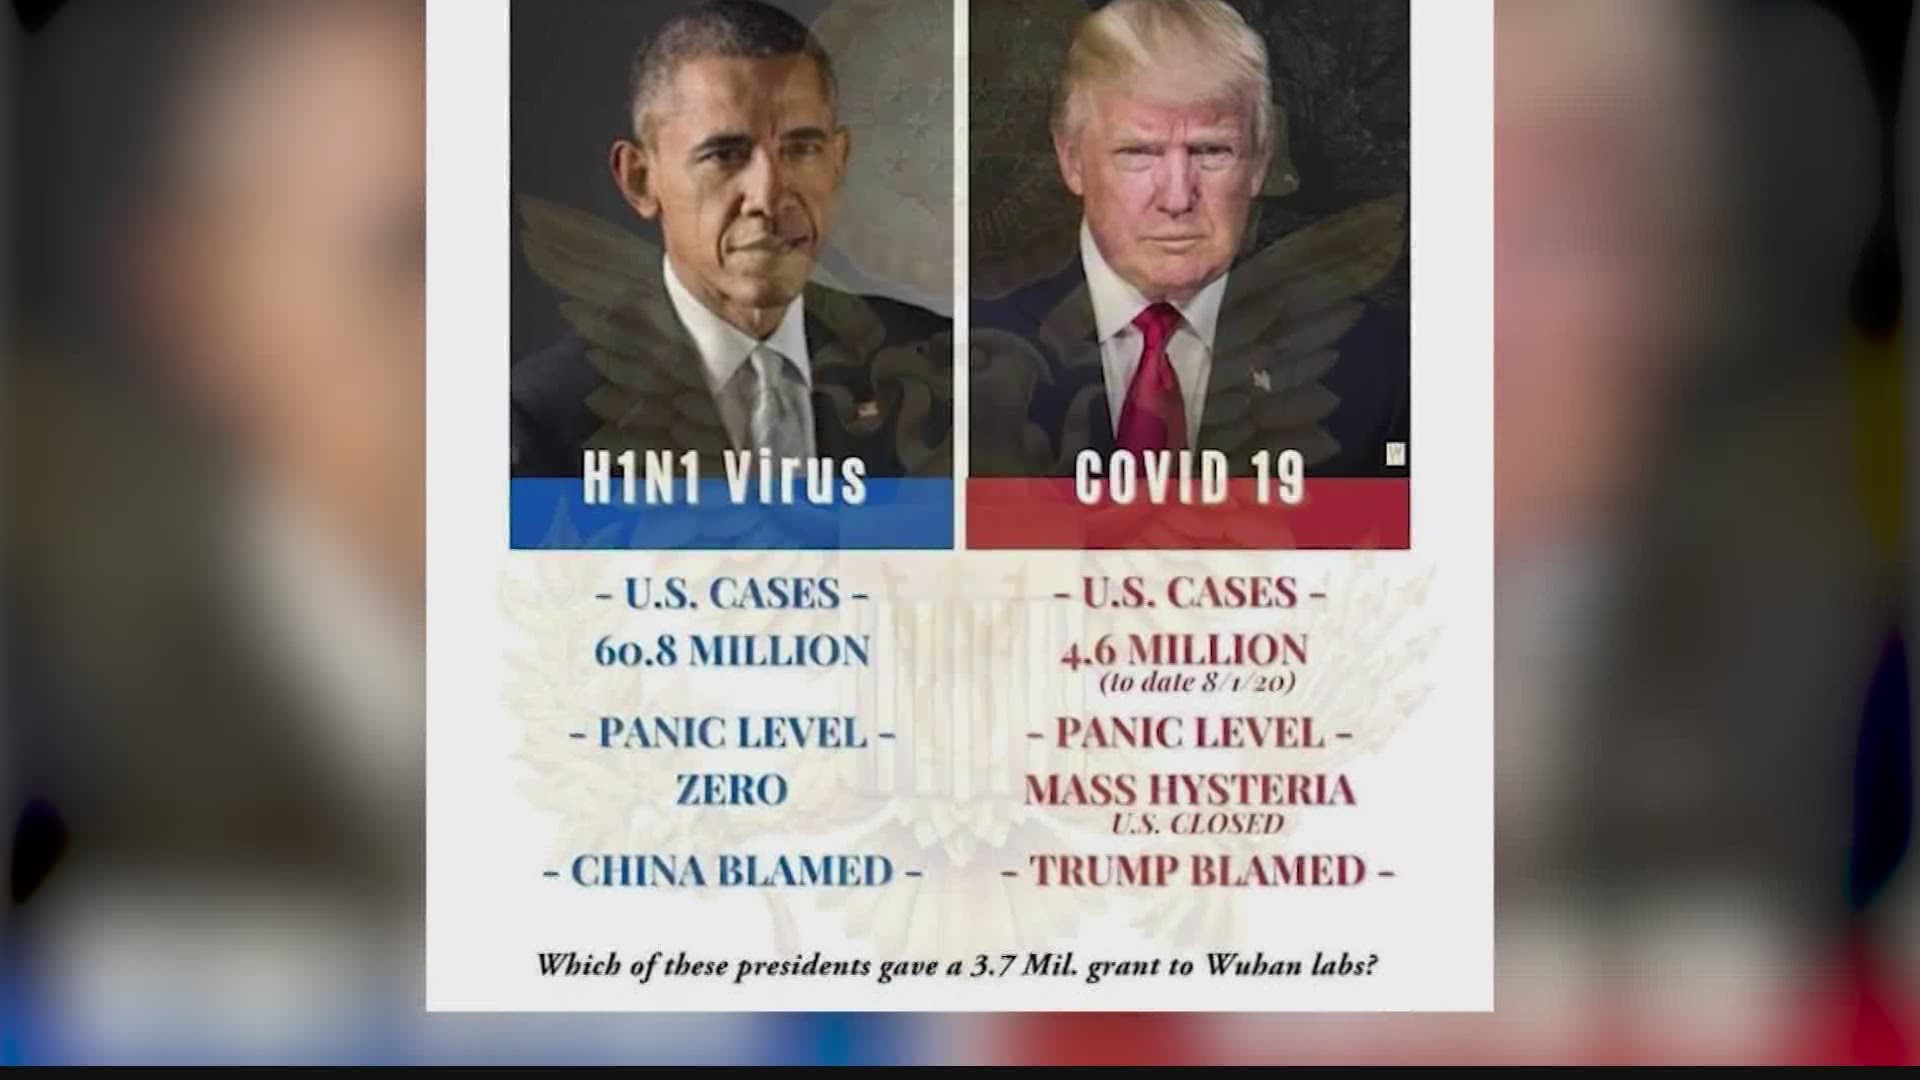 Viral meme compares pandemics faced by both President Trump and President Obama.